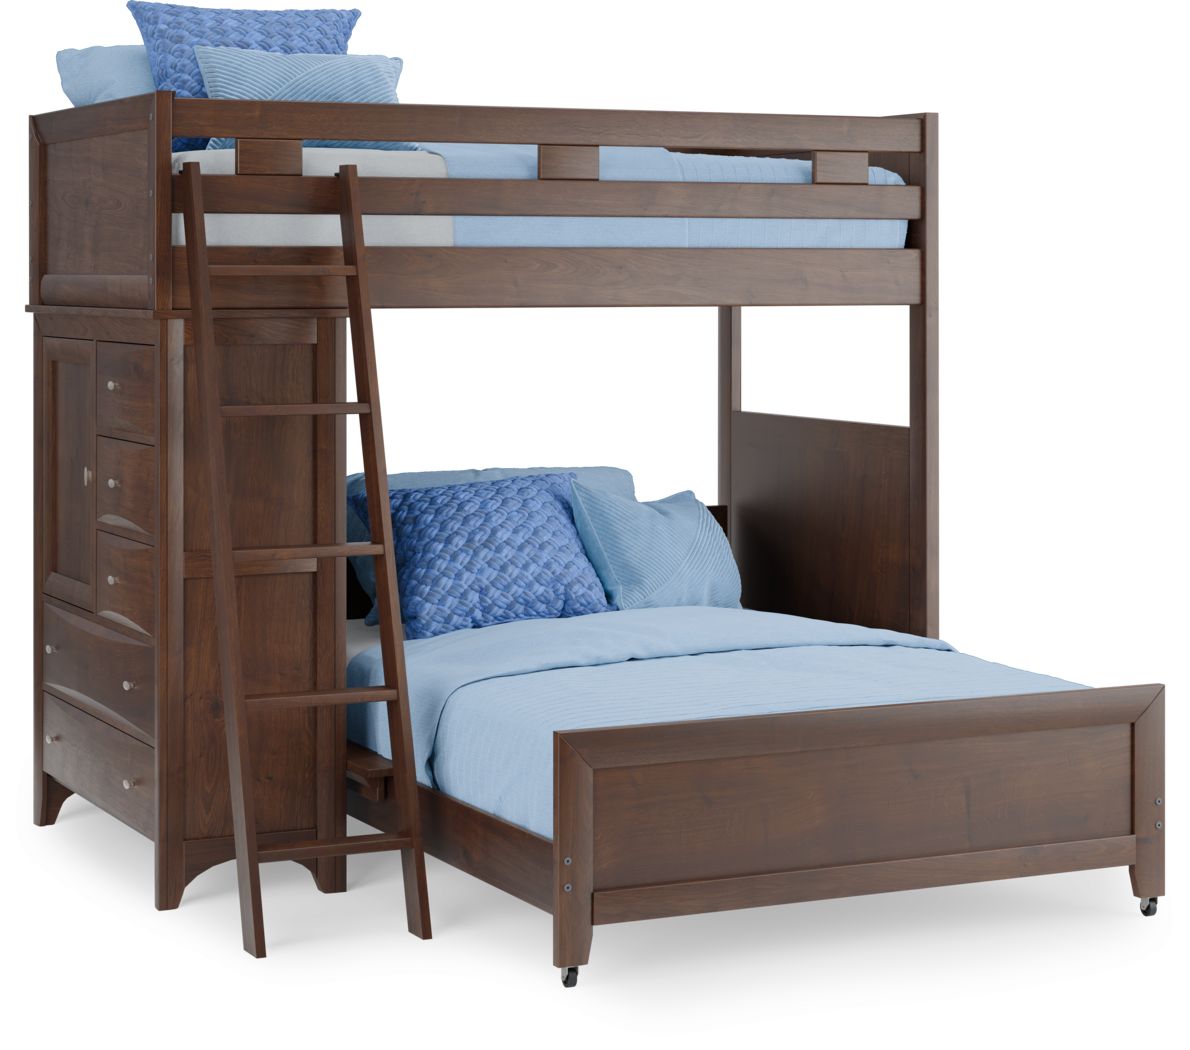 Ivy League Furniture Collection, Ivy League Bunk Bed Rooms To Go